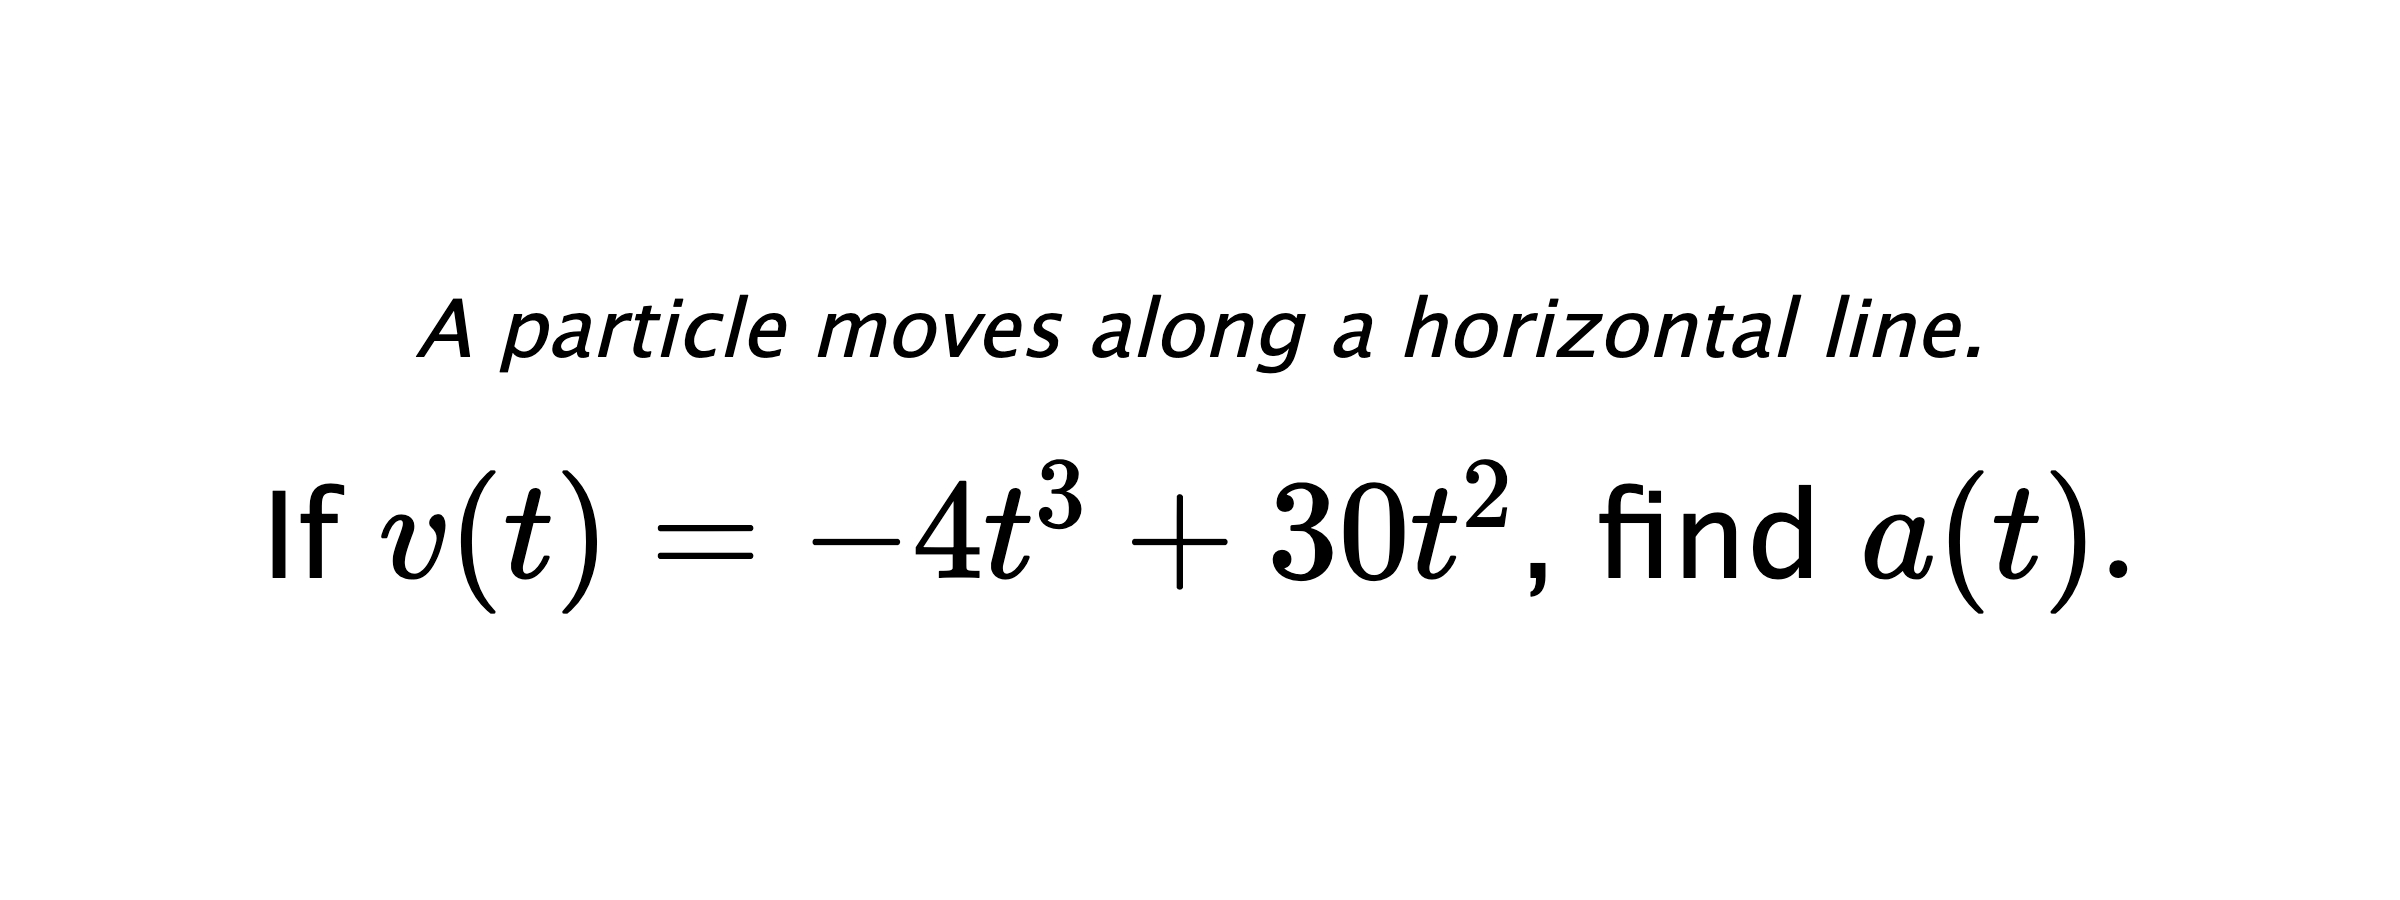 A particle moves along a horizontal line. If $ v(t)=-4t^3+30t^2 $, find $ a(t) .$